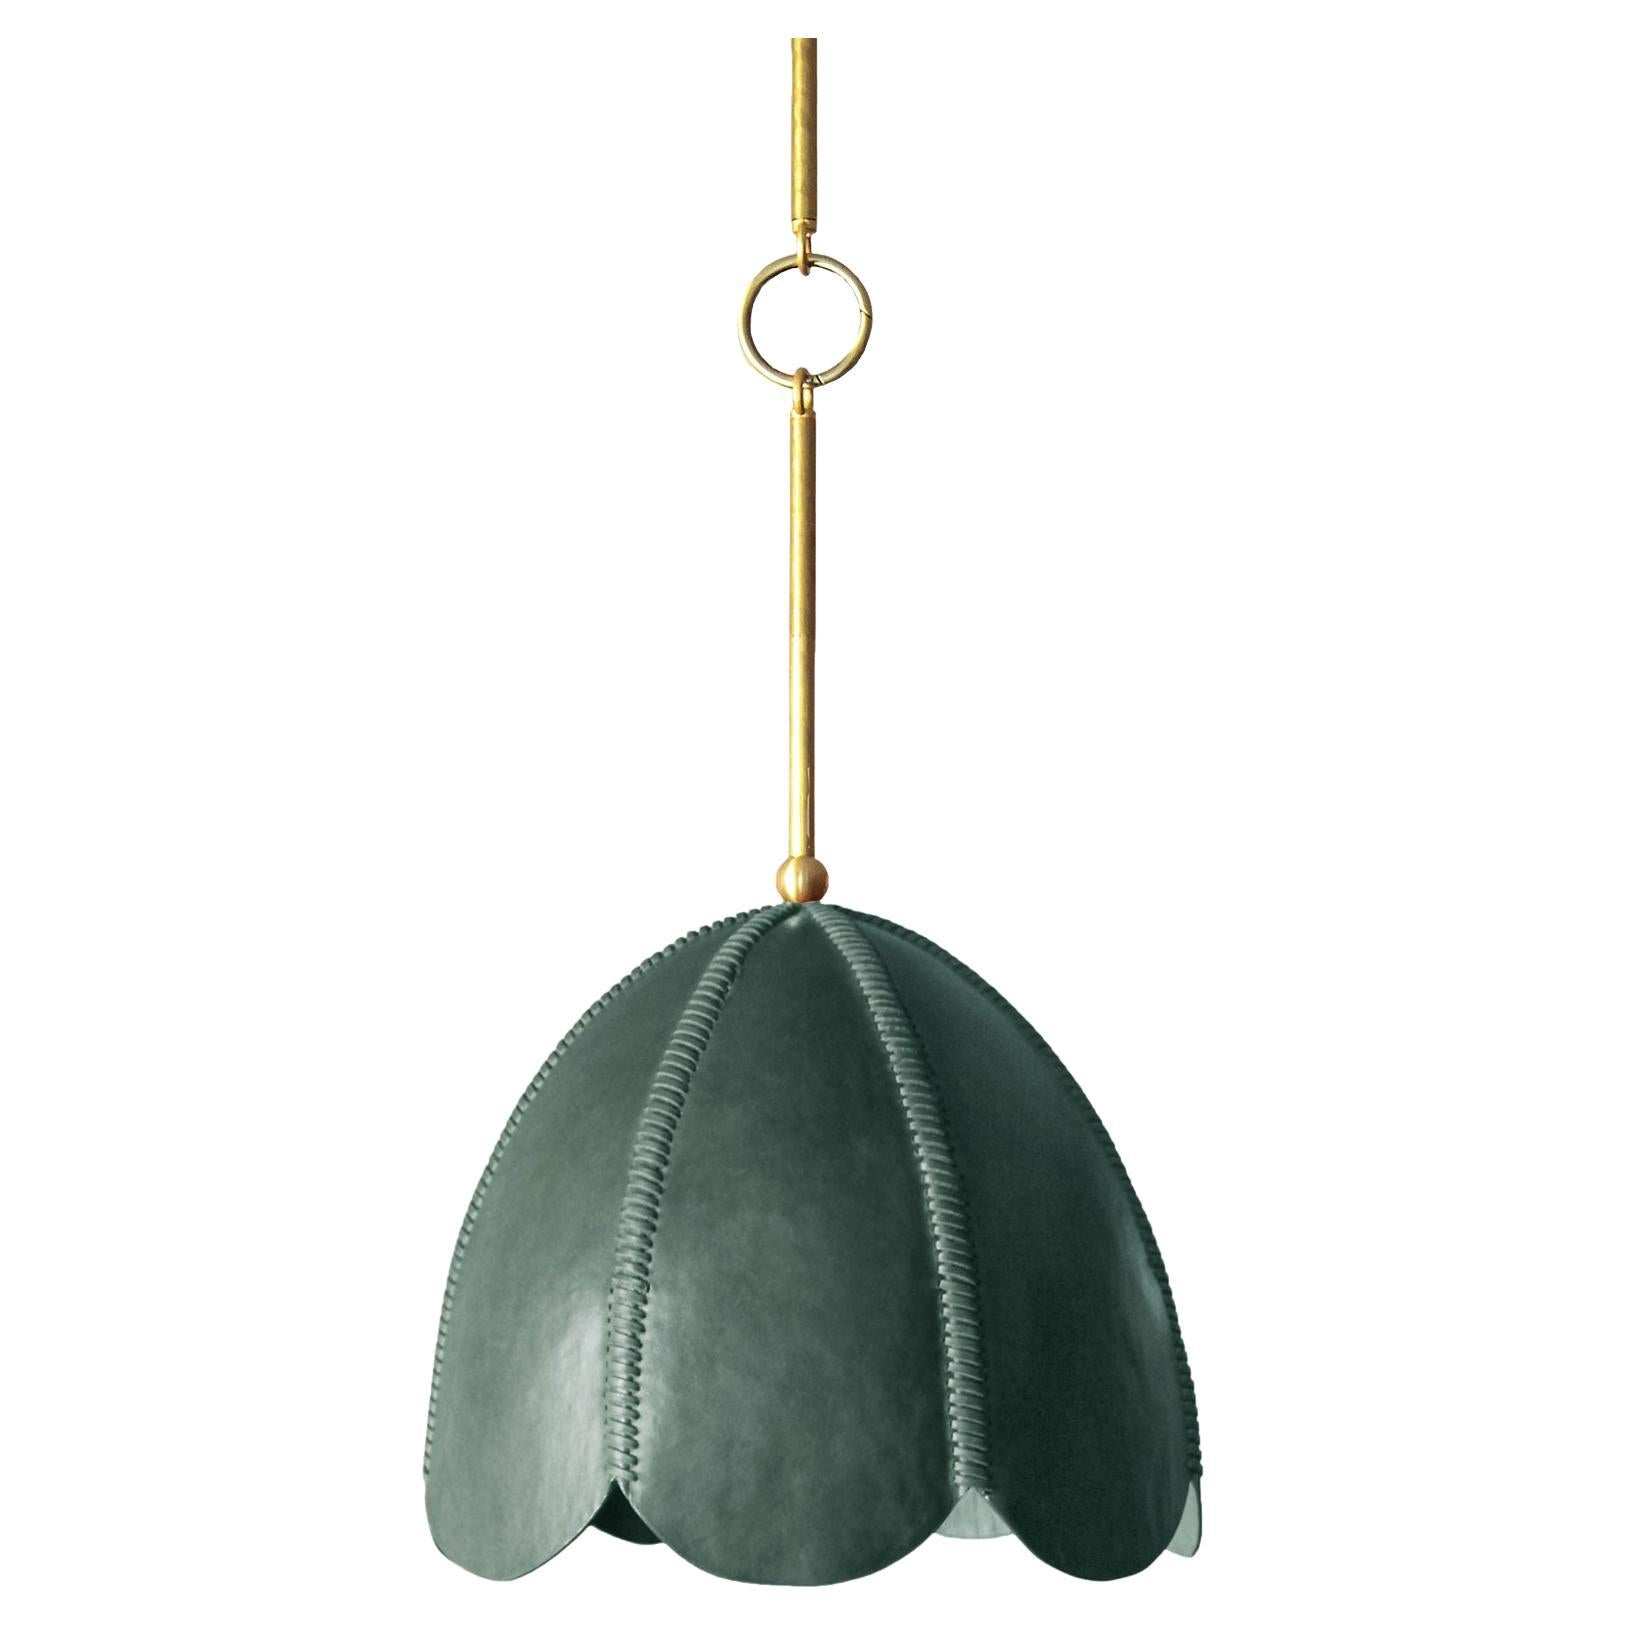 Leather Pendant Light in Emerald Green, Doma, Talabartero Saddle Lamp Collection